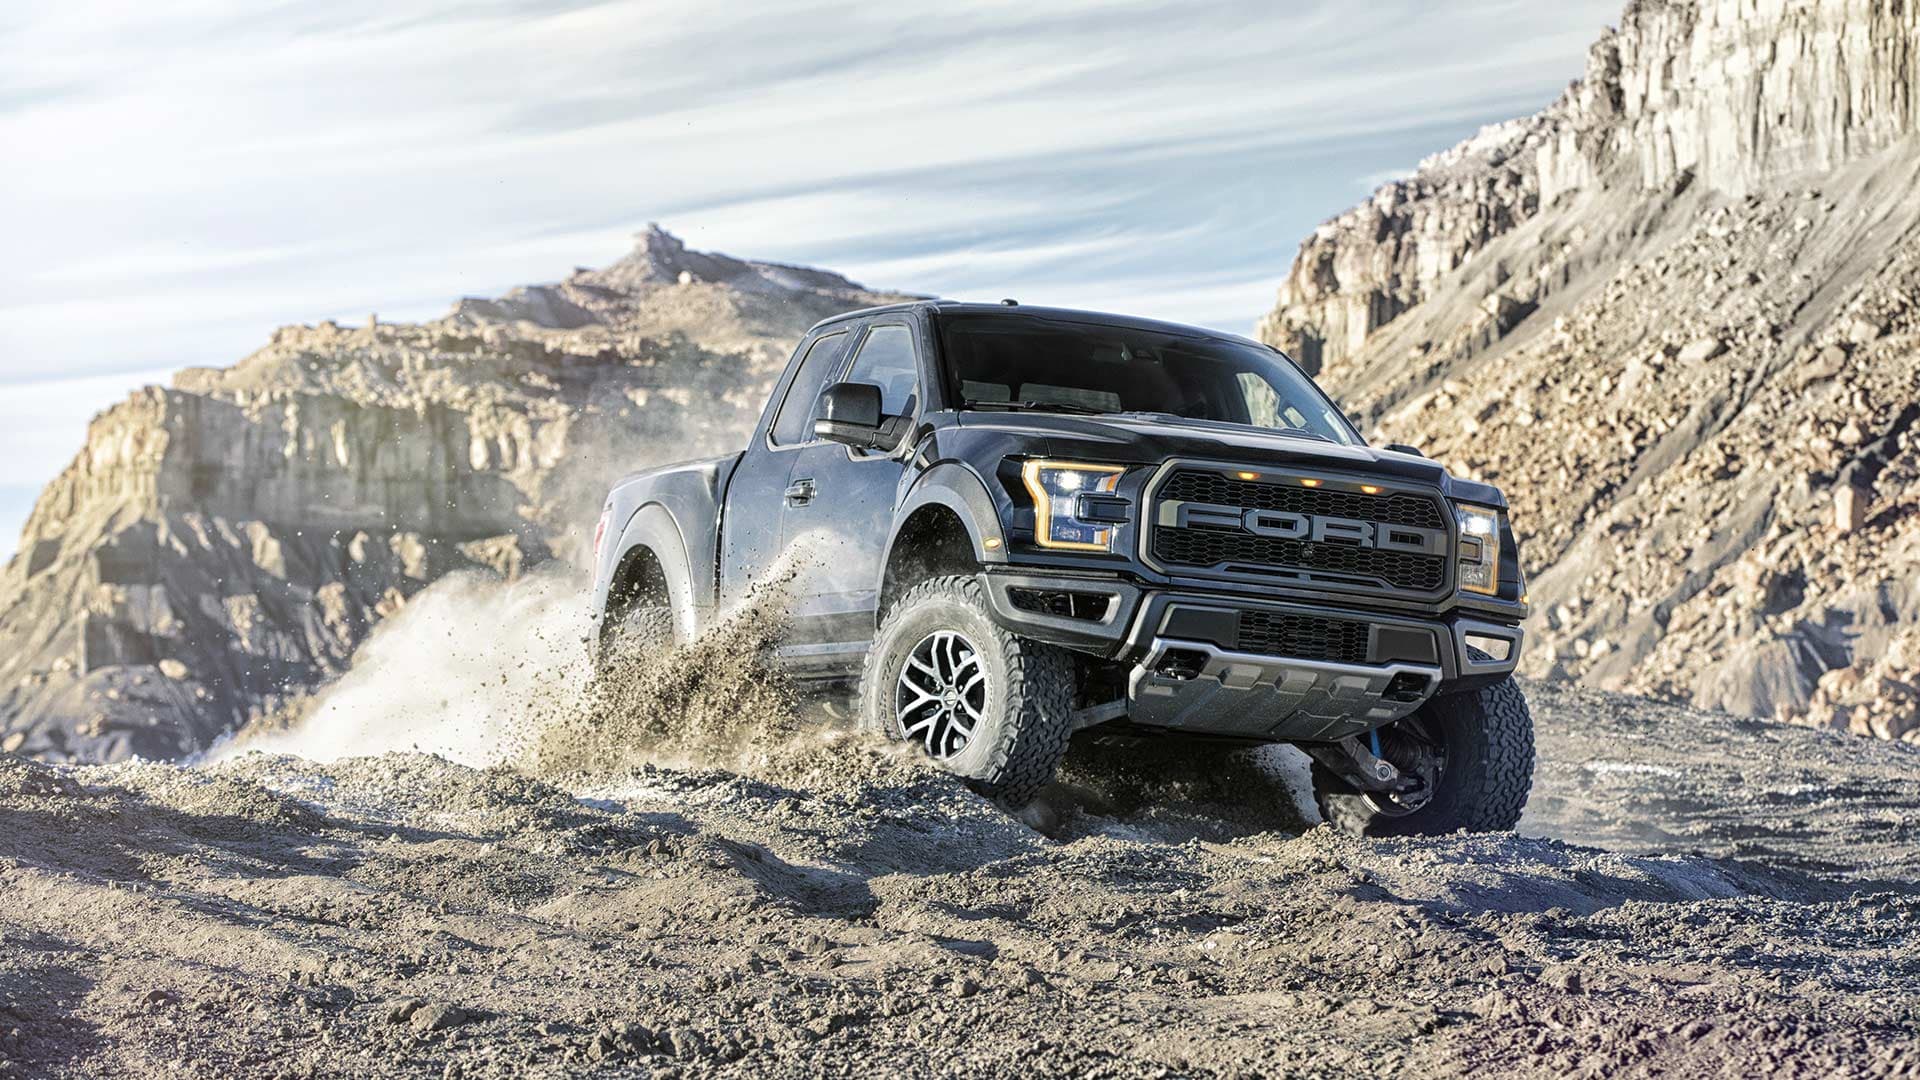 Take a Deep Dive Into the 2017 Ford F-150 Raptor’s Off-Road Capabilities